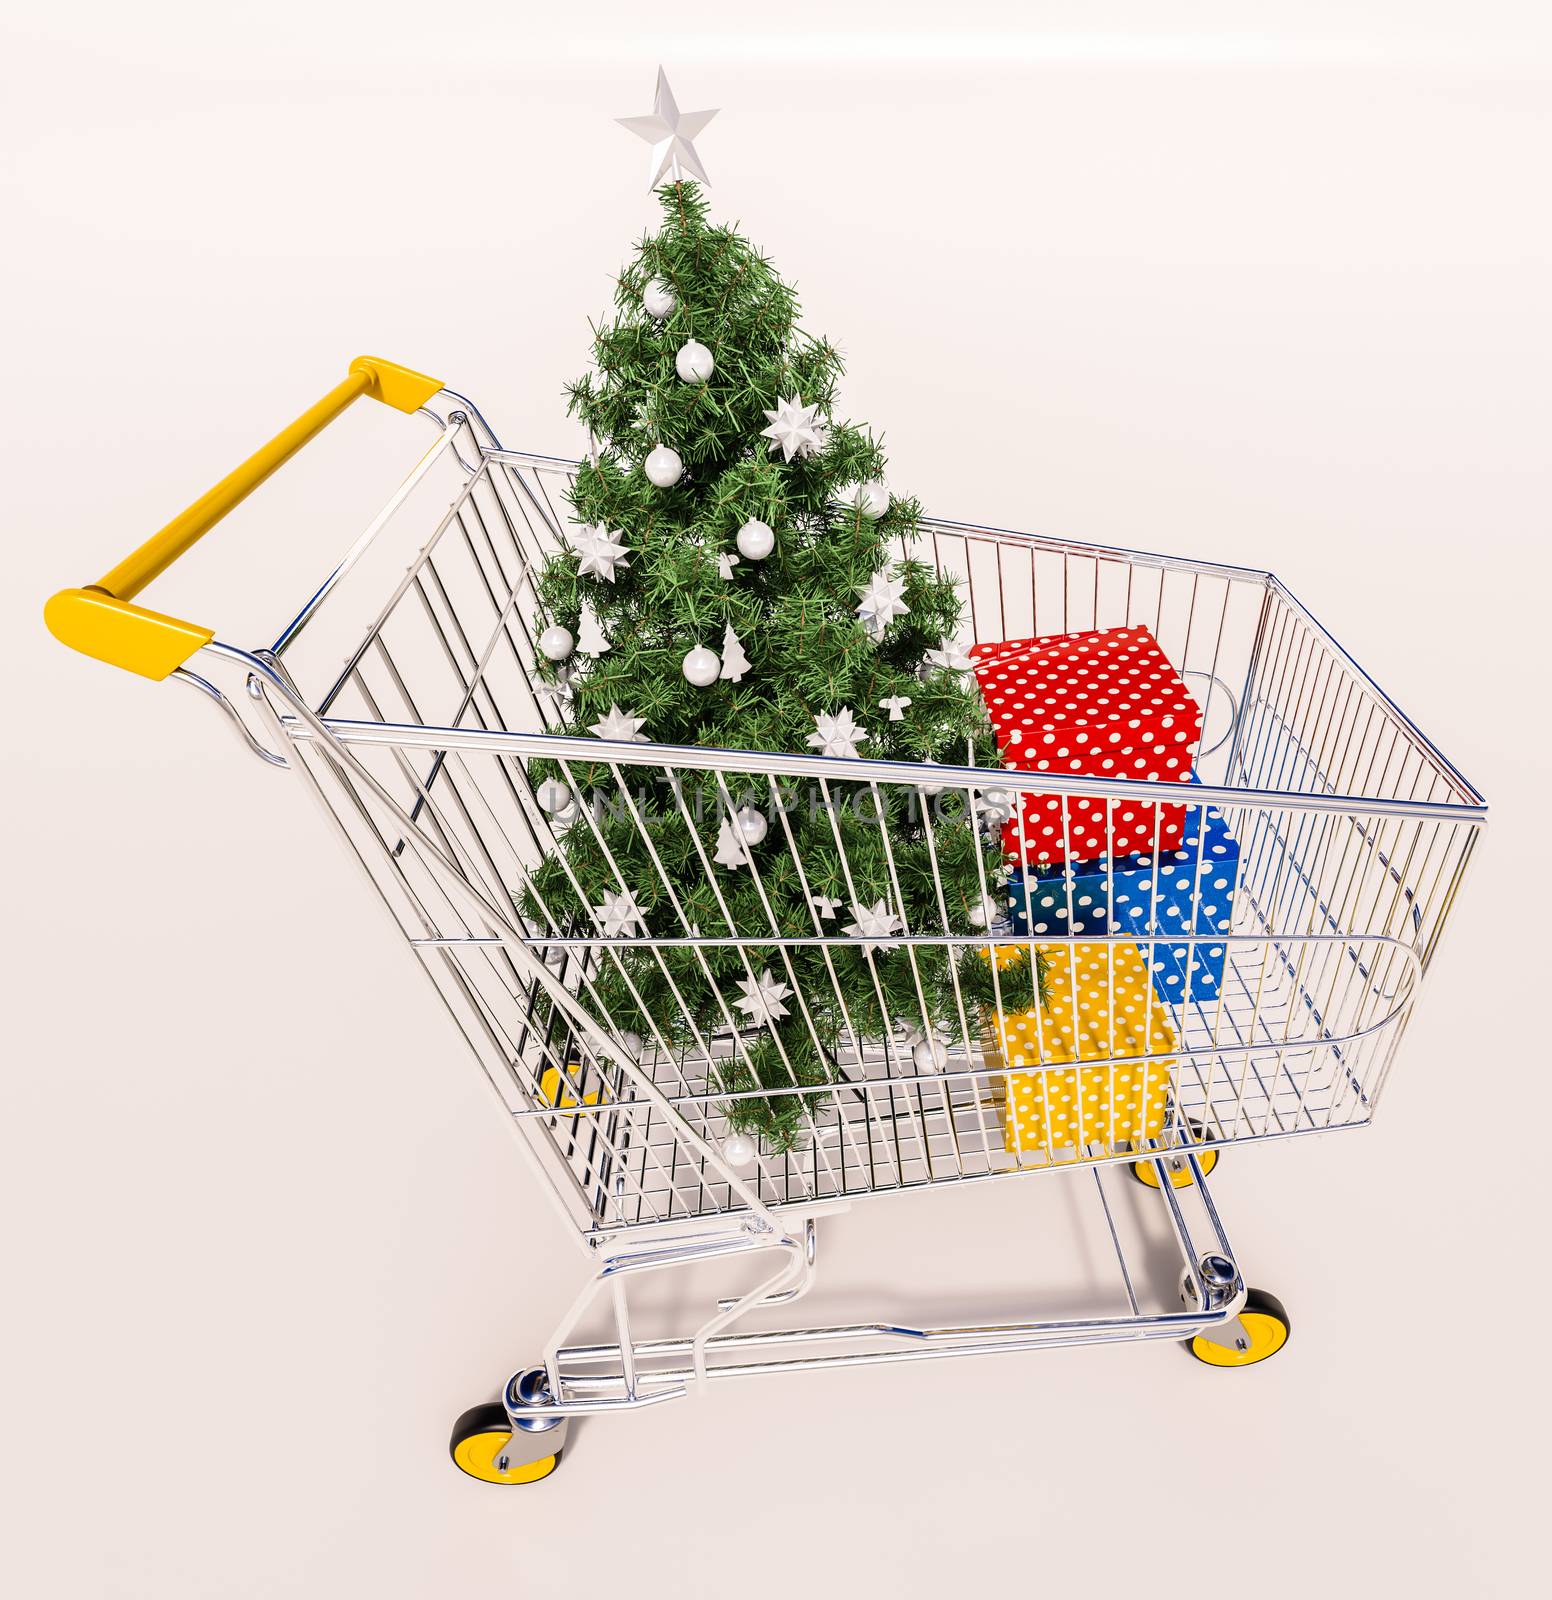 Happy New Year! Merry Christmas! Choosing a Christmas or New Year Gift,  Closeup Of A Shopping Cart With Gifts, Family Christmas Shopping, Christmas Tree Presents In Shopping Basket, Christmas Sale